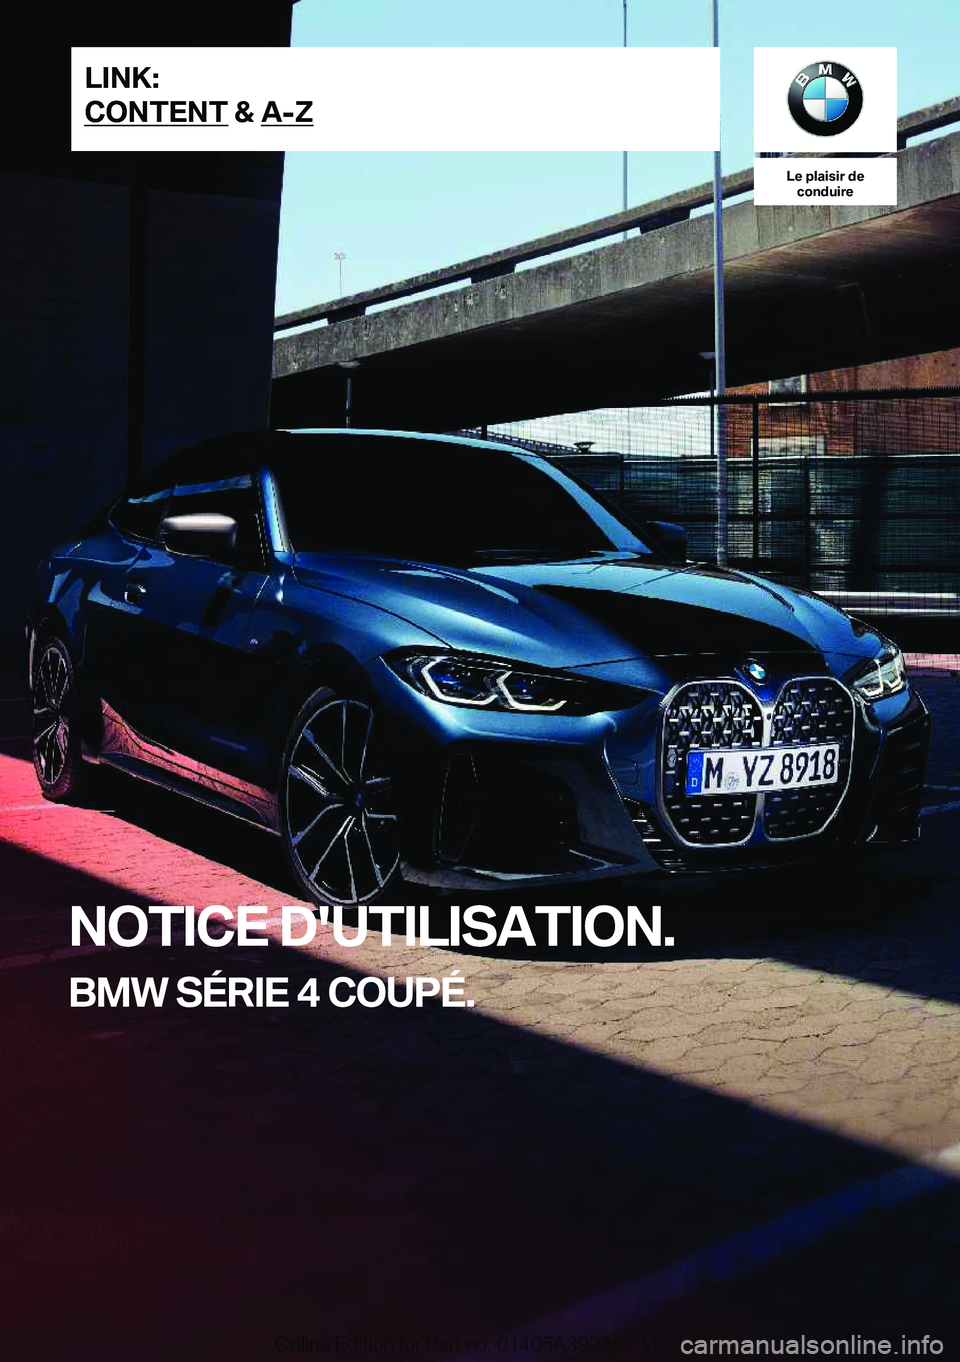 BMW 4 SERIES 2022  Notices Demploi (in French) �L�e��p�l�a�i�s�i�r��d�e�c�o�n�d�u�i�r�e
�N�O�T�I�C�E��D�'�U�T�I�L�I�S�A�T�I�O�N�.
�B�M�W��S�